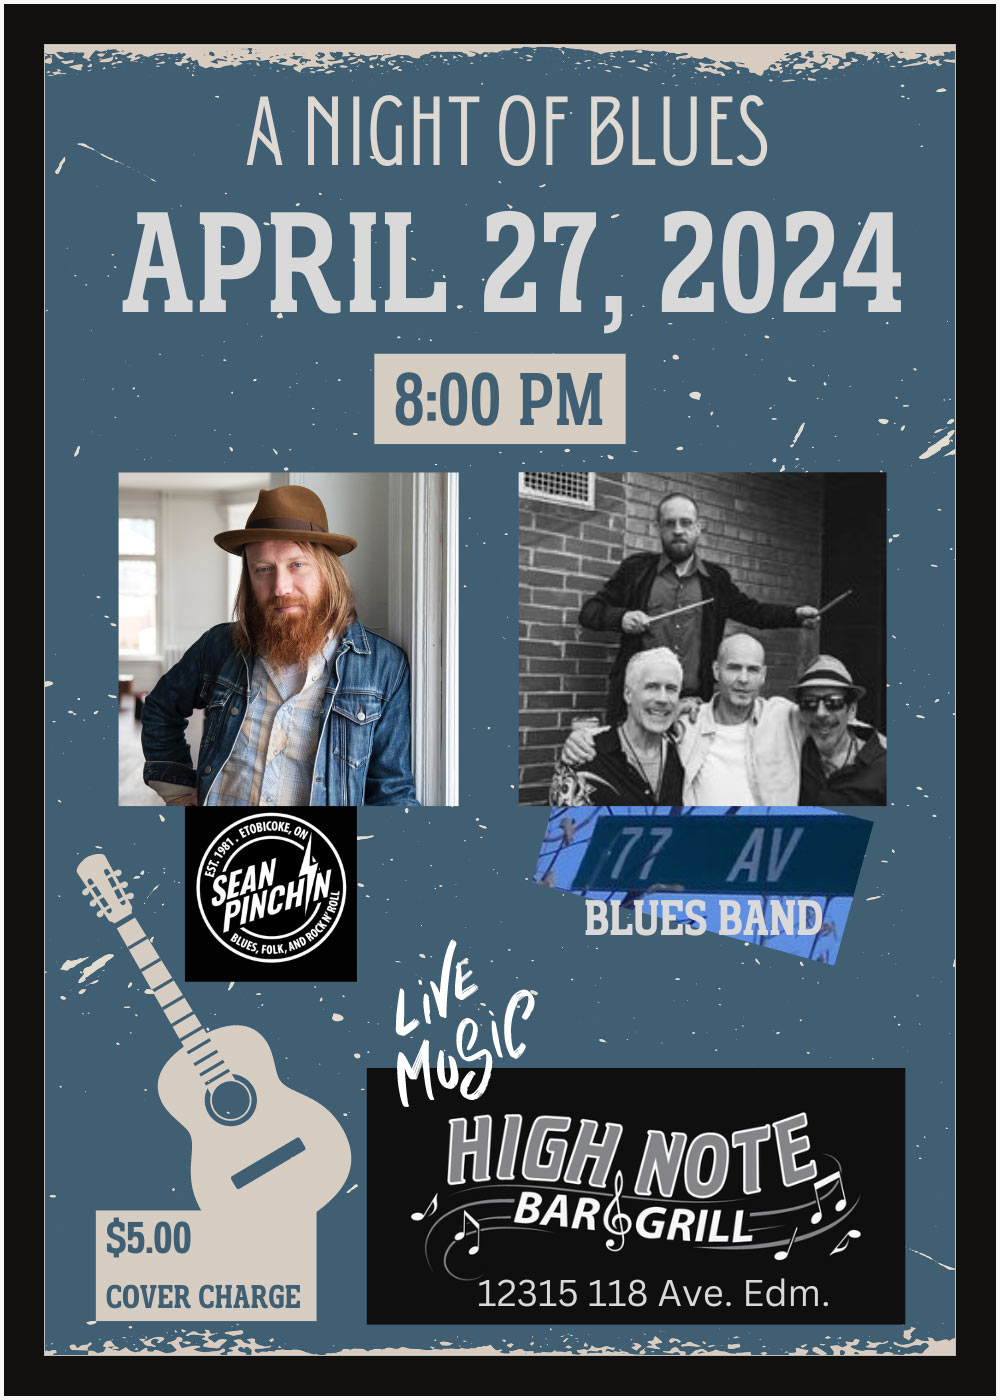 A Night of Blues with Sean Pinchin and 77th Ave Blues